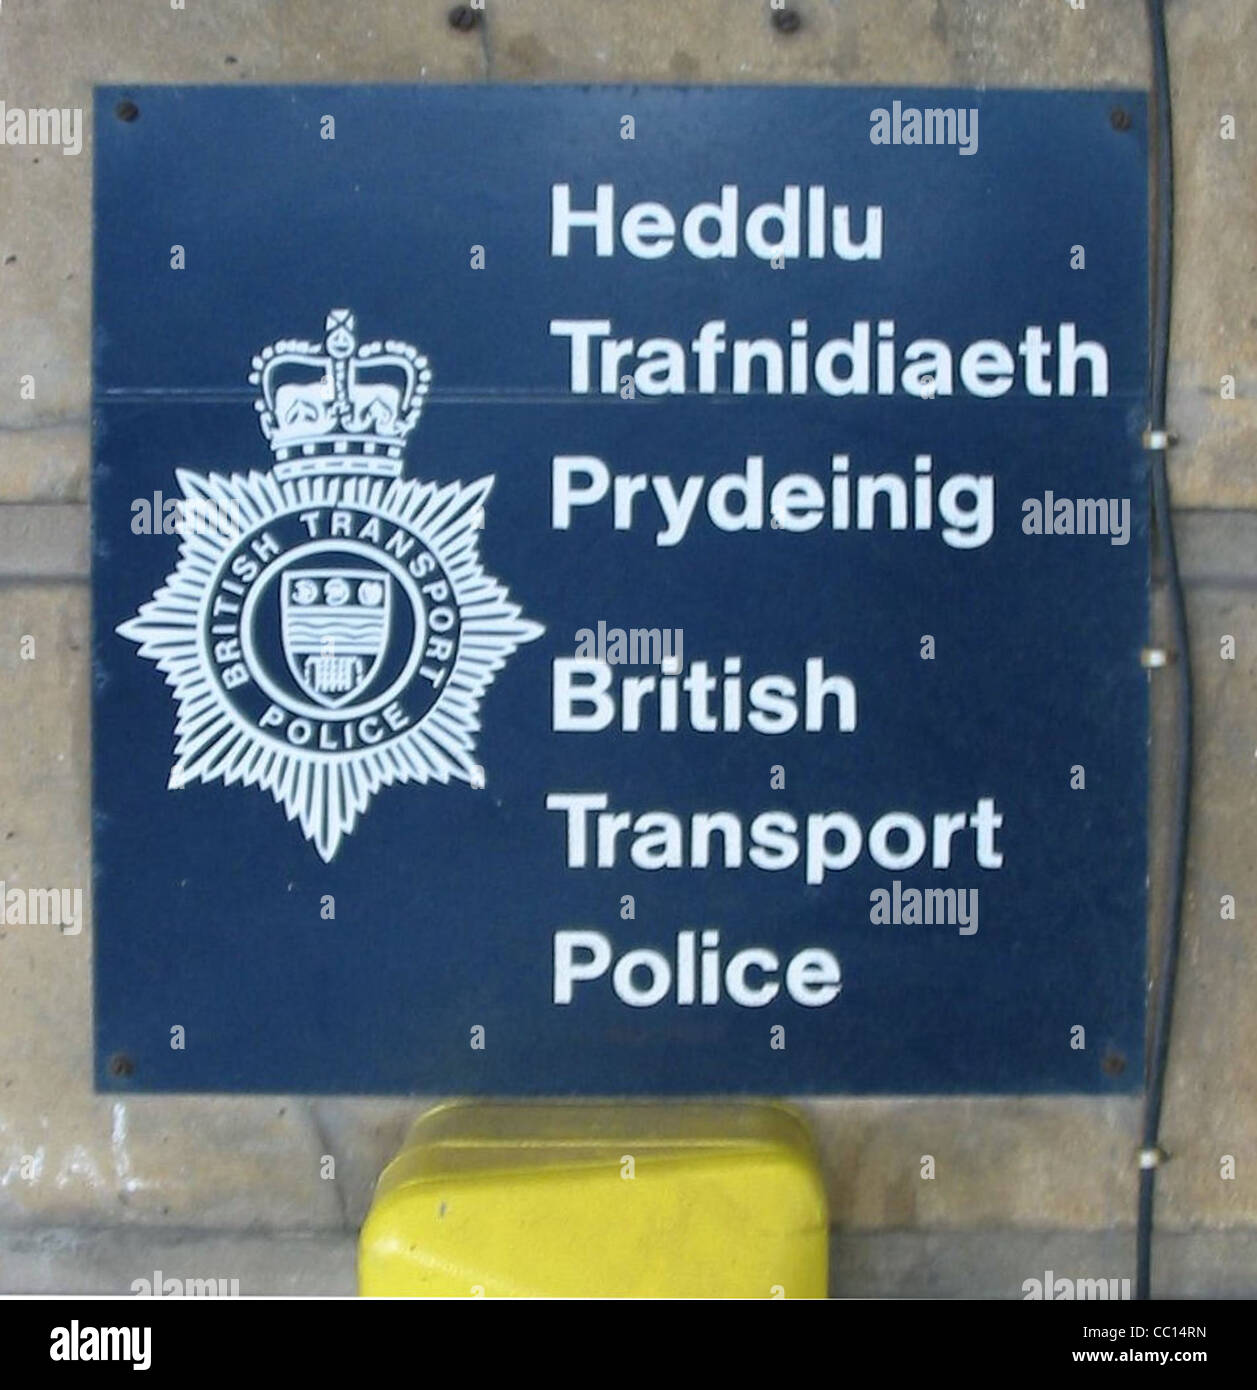 British Transport Police sign english and welsh Stock Photo